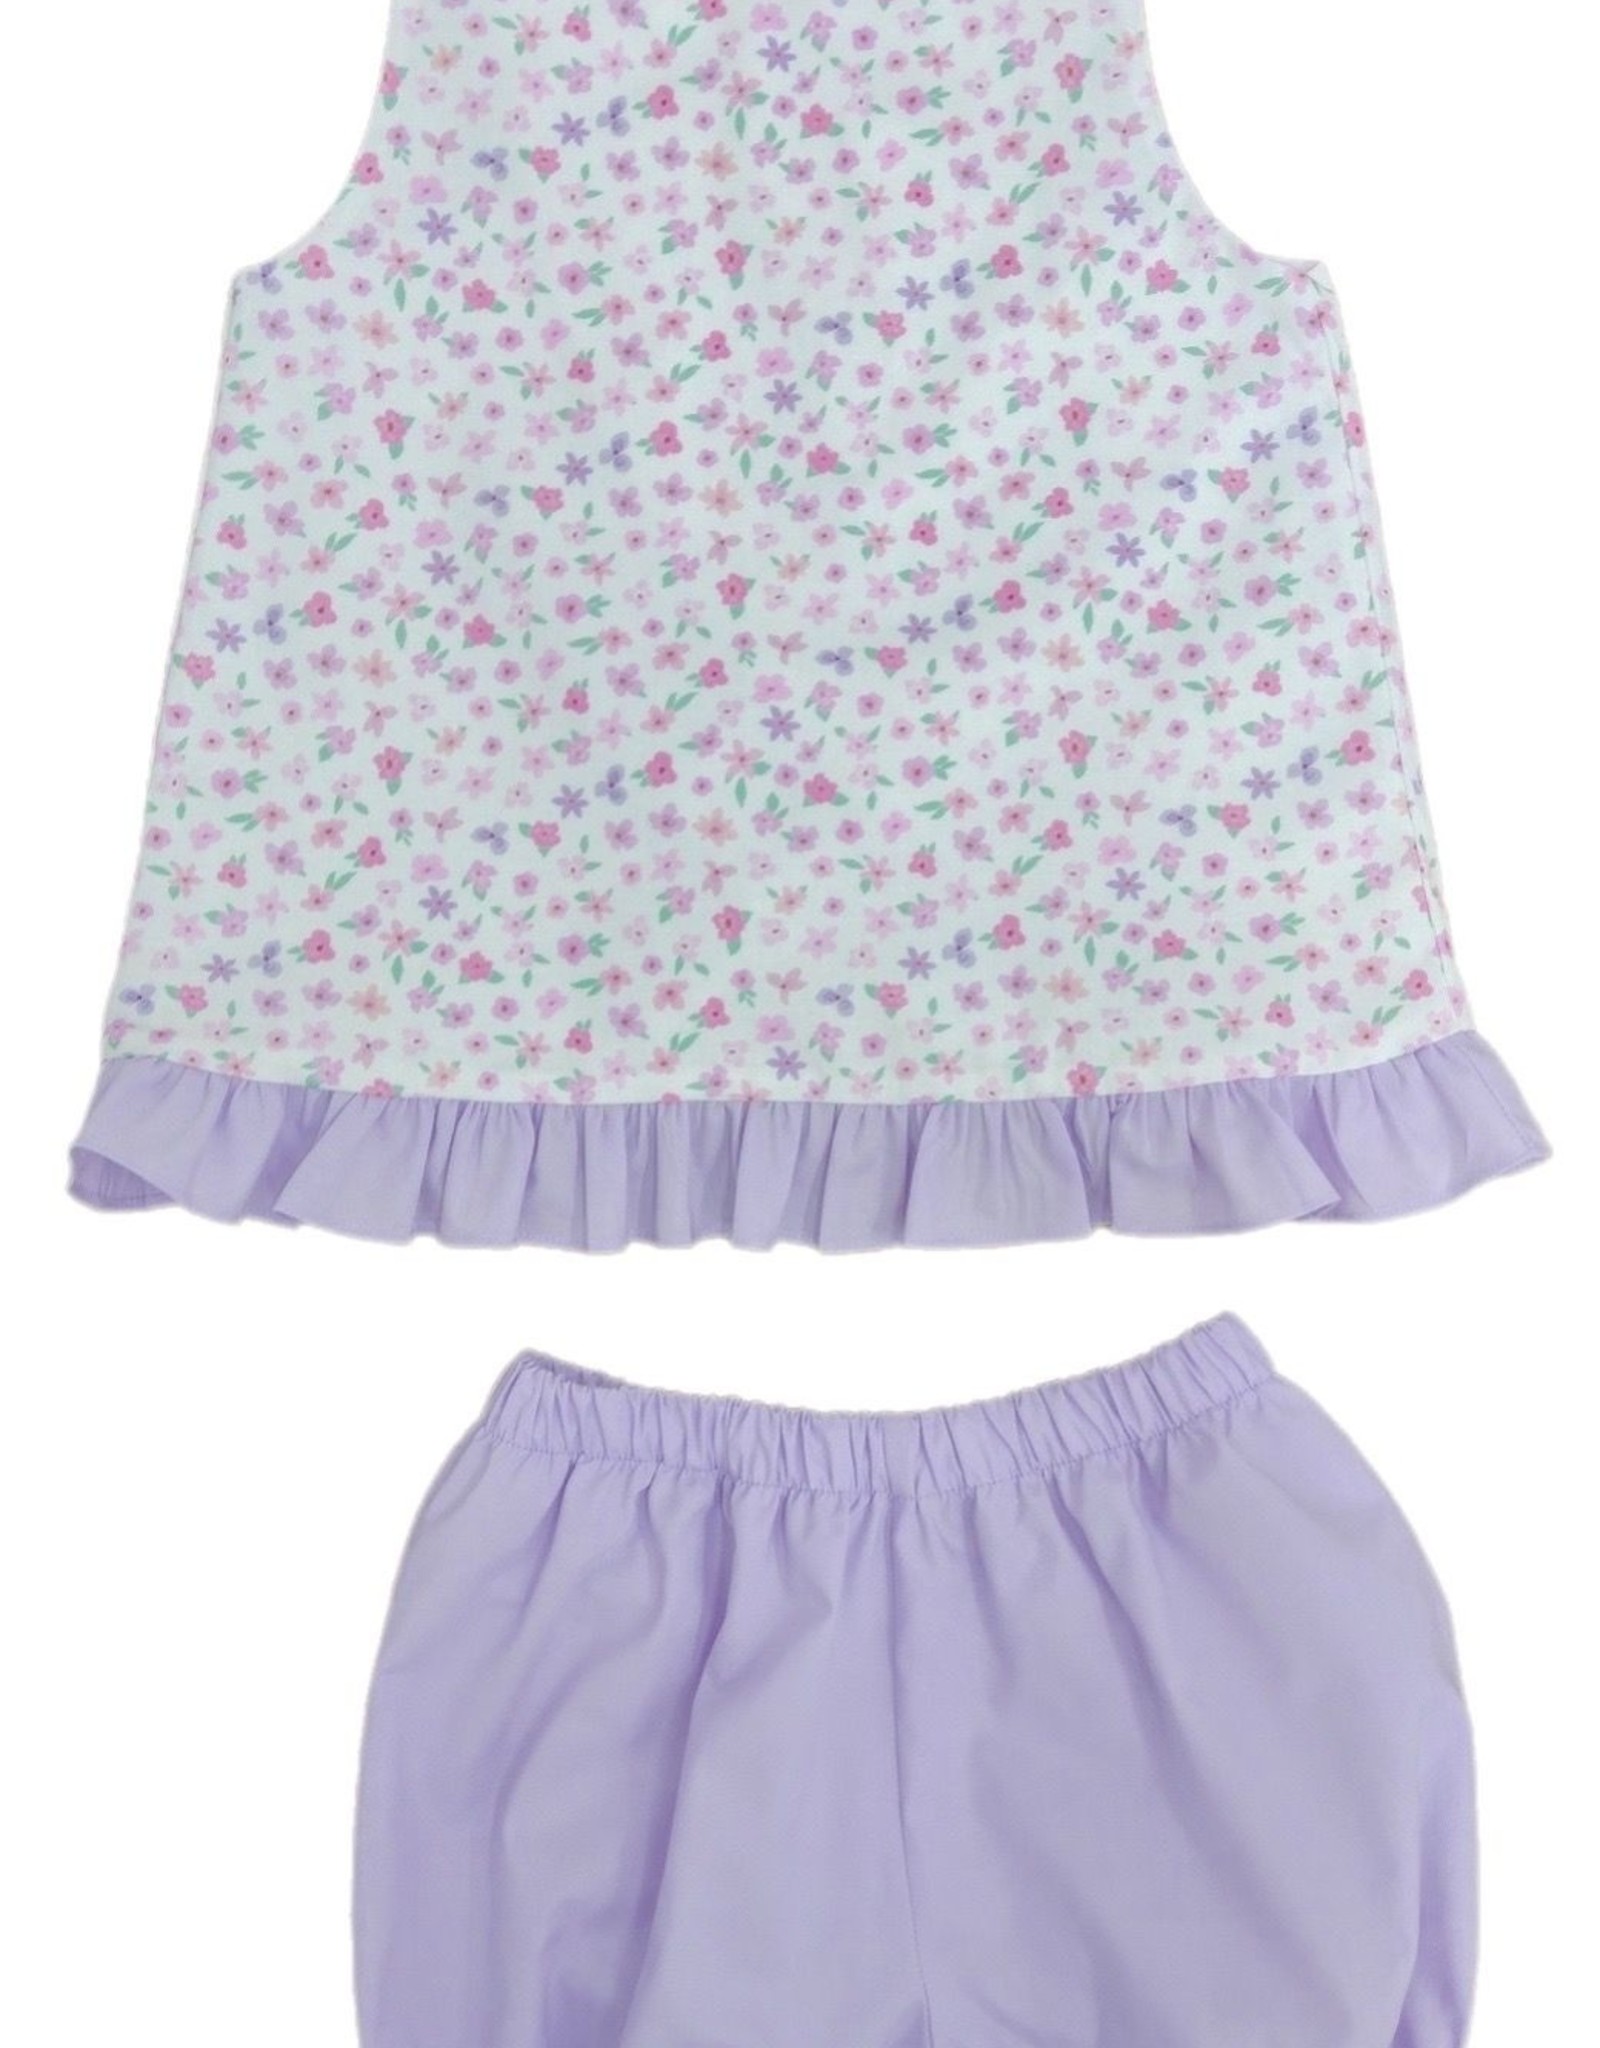 James and Lottie Poppy Pinafore Bloomer Set